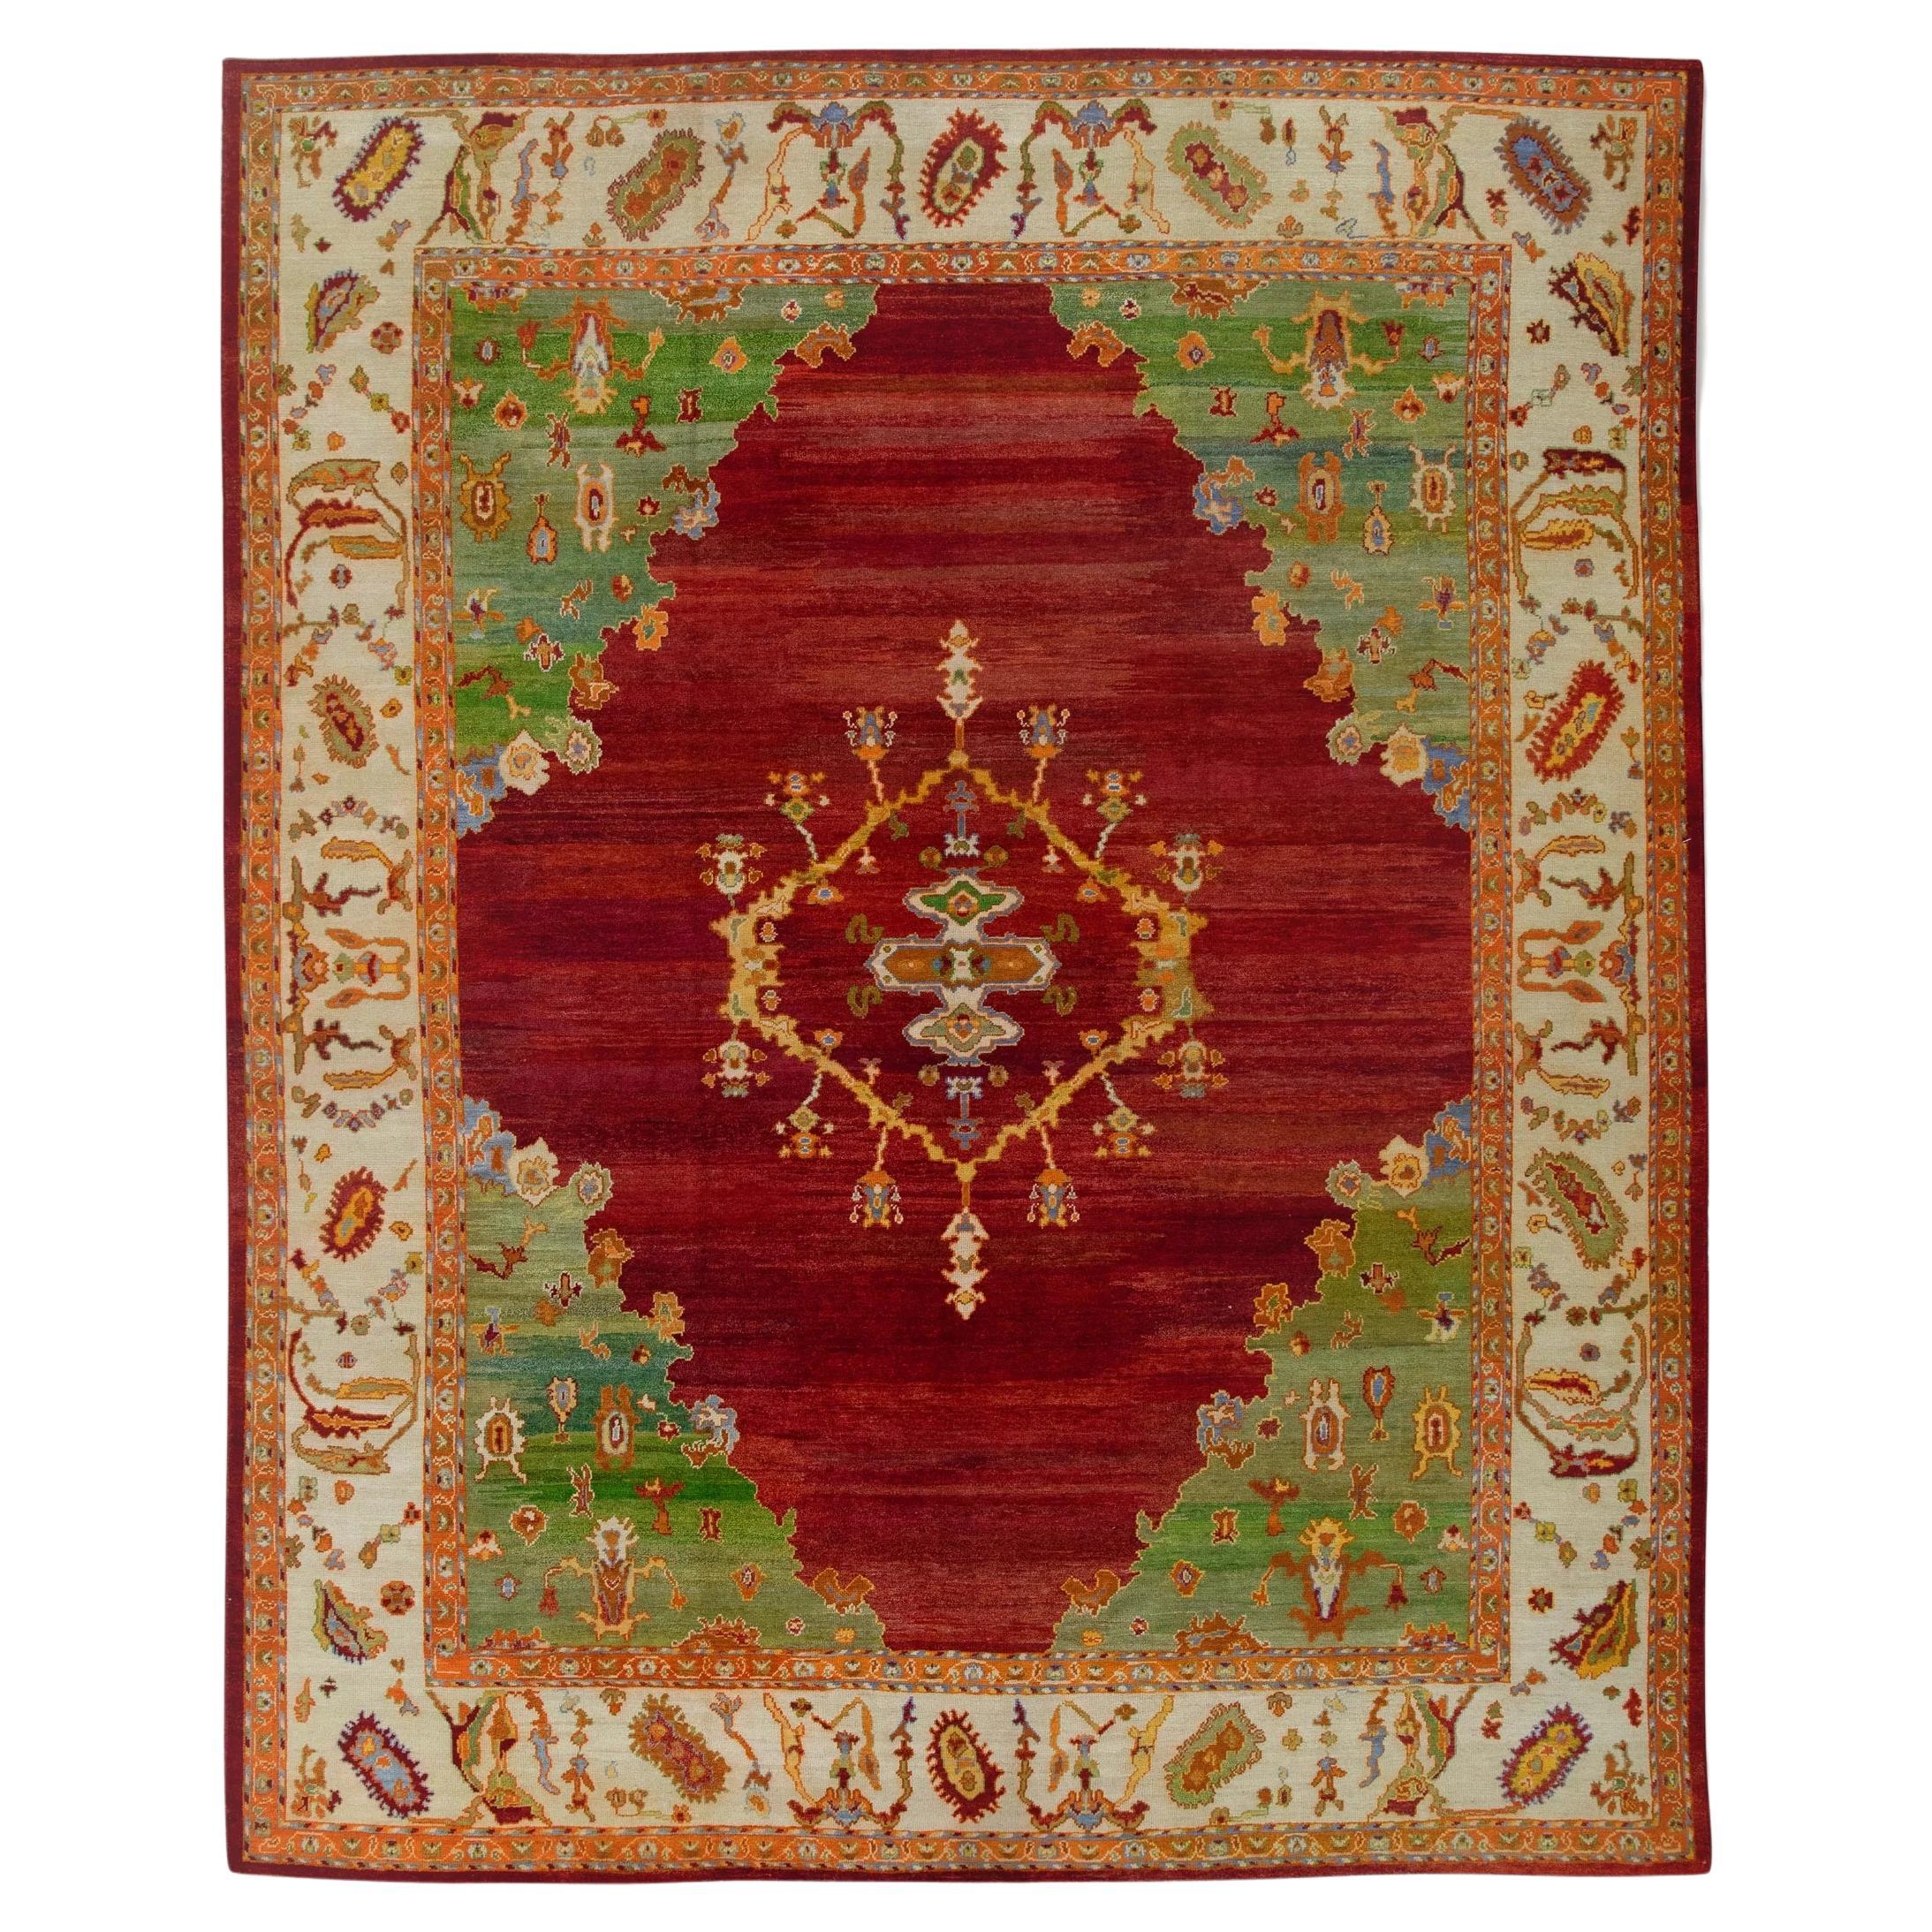 Green & Red Handwoven Old Wool Turkish Oushak Rug 12'10" x 15'11"